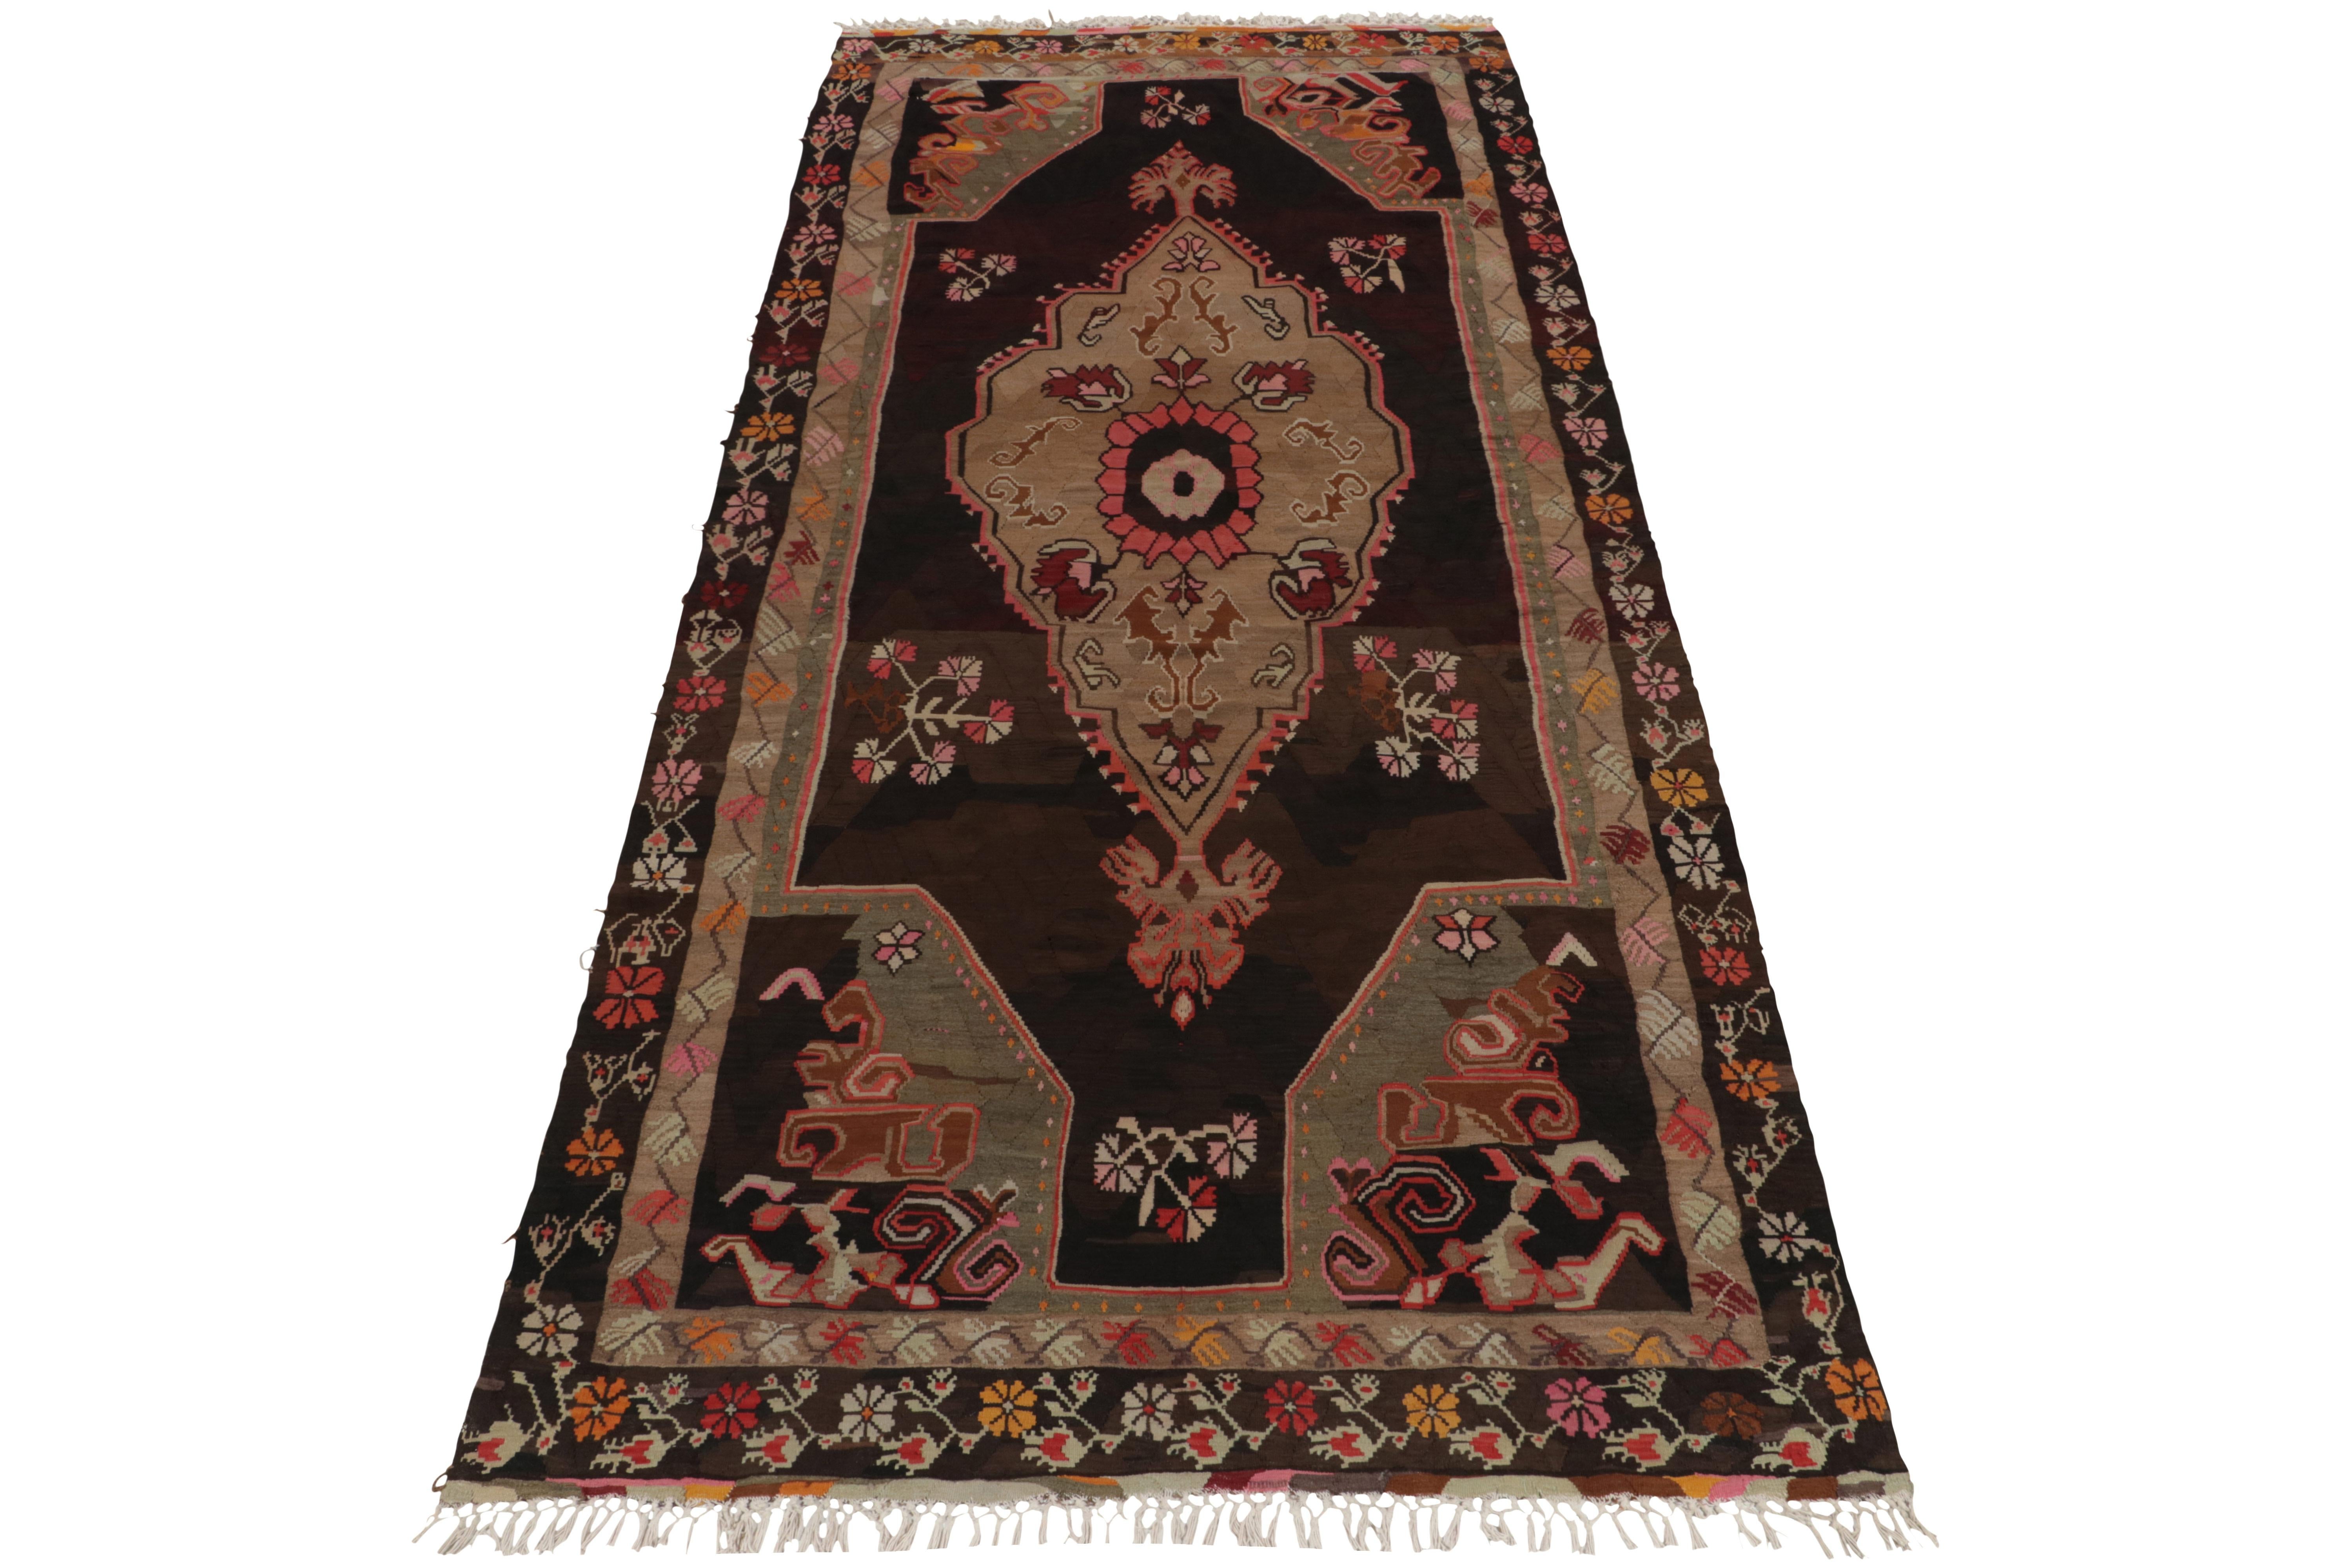 Handwoven in wool, a 6x14 vintage Bessarabian kilim rug from our flatweave selections. Originating from Turkey circa 1950-1960, the creation carries nomadic inspiration with a striking medallion in gorgeous beige, brown & pink accents. The border